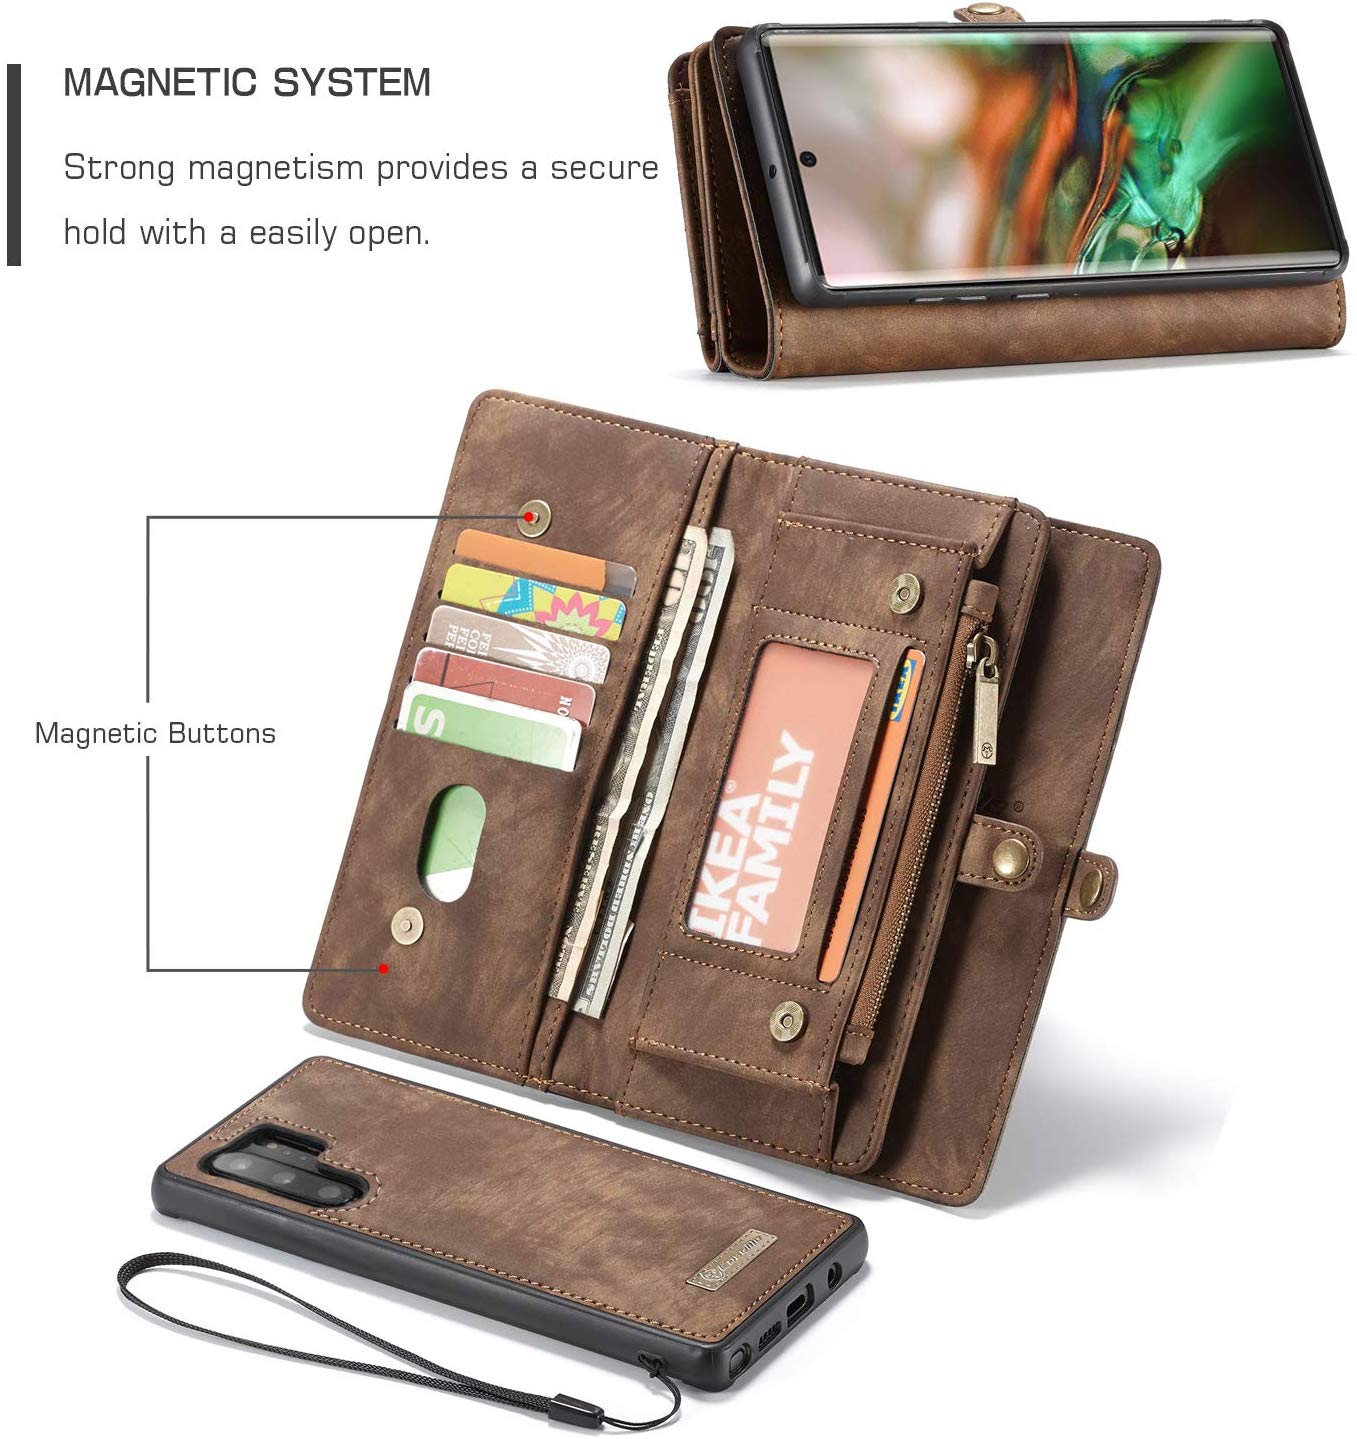 Samsung Galaxy Note 10 Plus Magnetic flip Wallet case cover